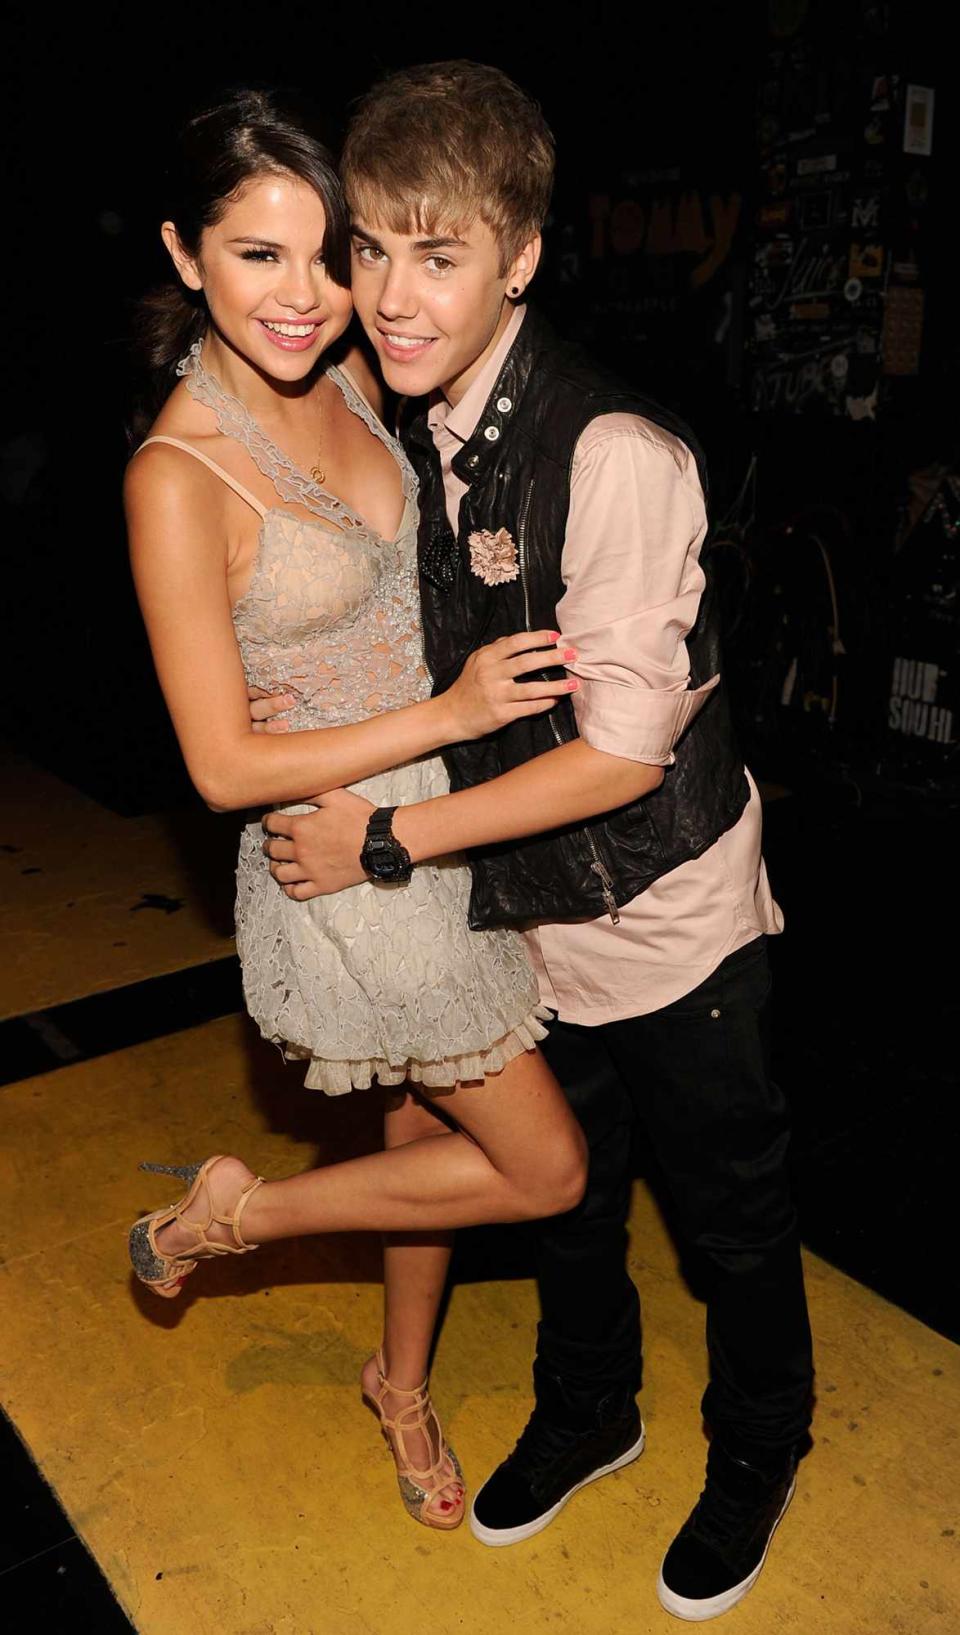 Selena Gomez (L) and musician Justin Bieber attend the 2011 Teen Choice Awards at Gibson Universal Amphitheatre on August 7, 2011 in Universal City, California